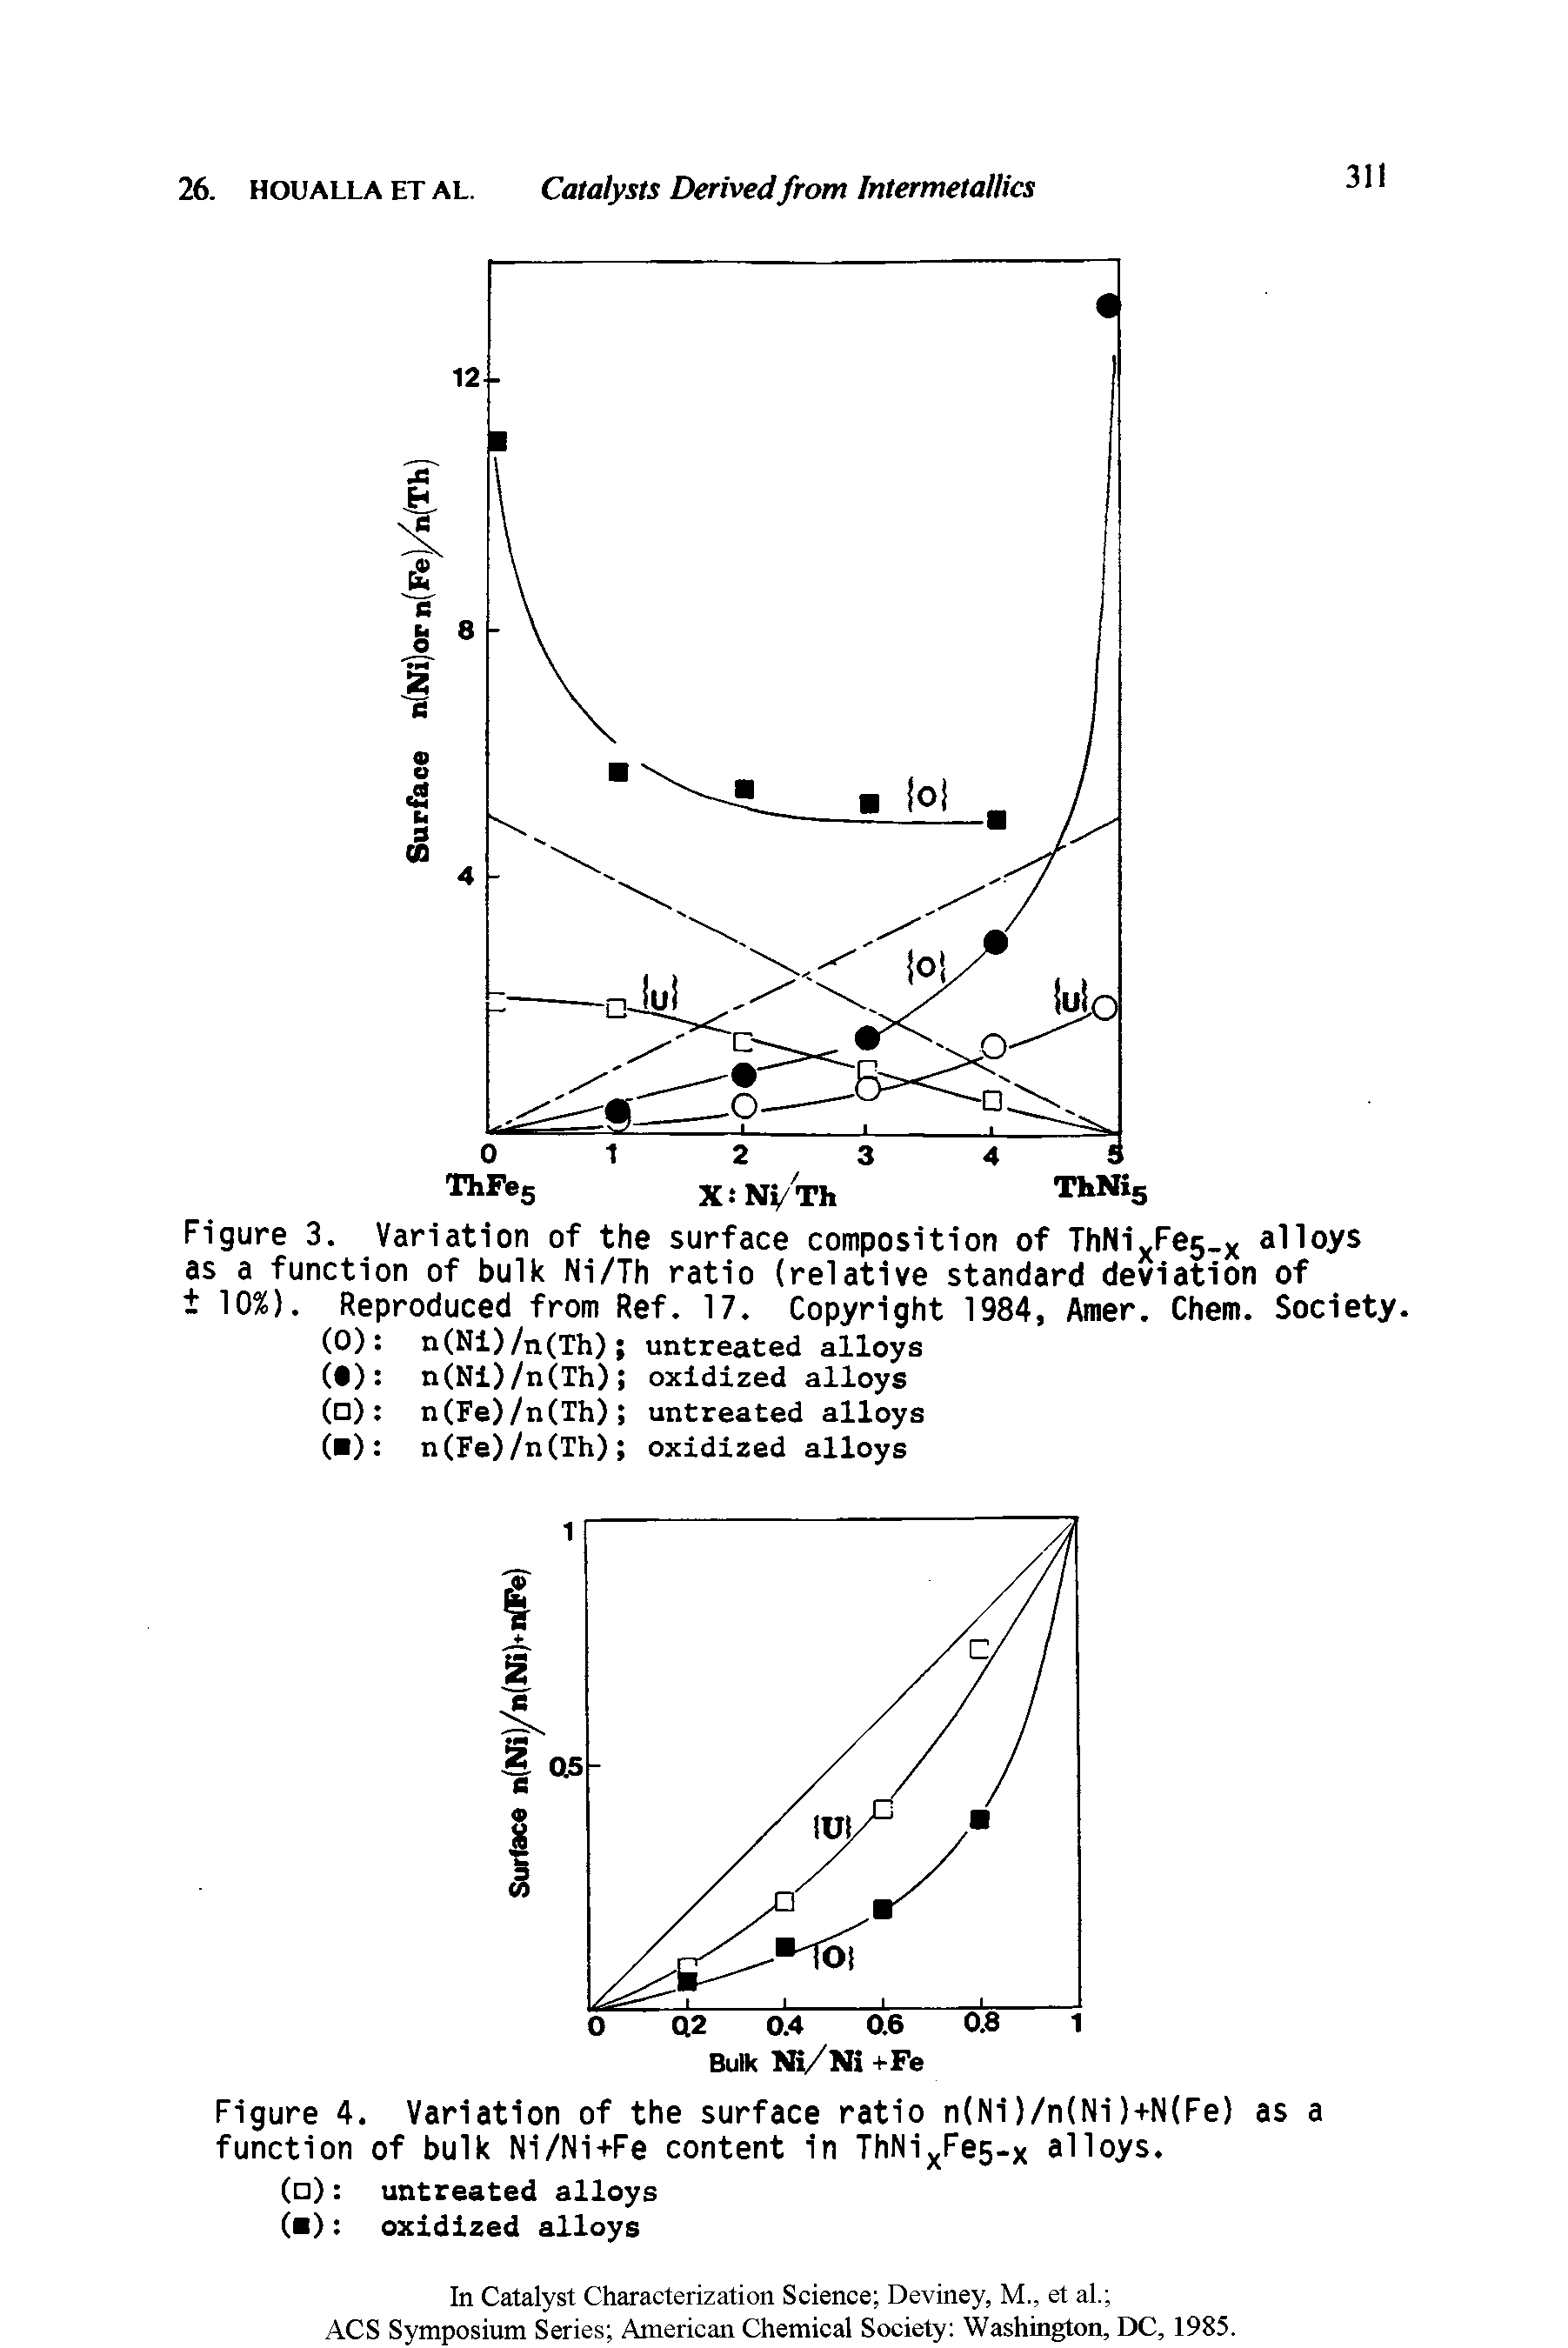 Figure 4. Variation of the surface ratio n(Ni)/n(Ni)+N(Fe) as a function of bulk Ni/Ni+Fe content in ThNij Fes-x alloys.